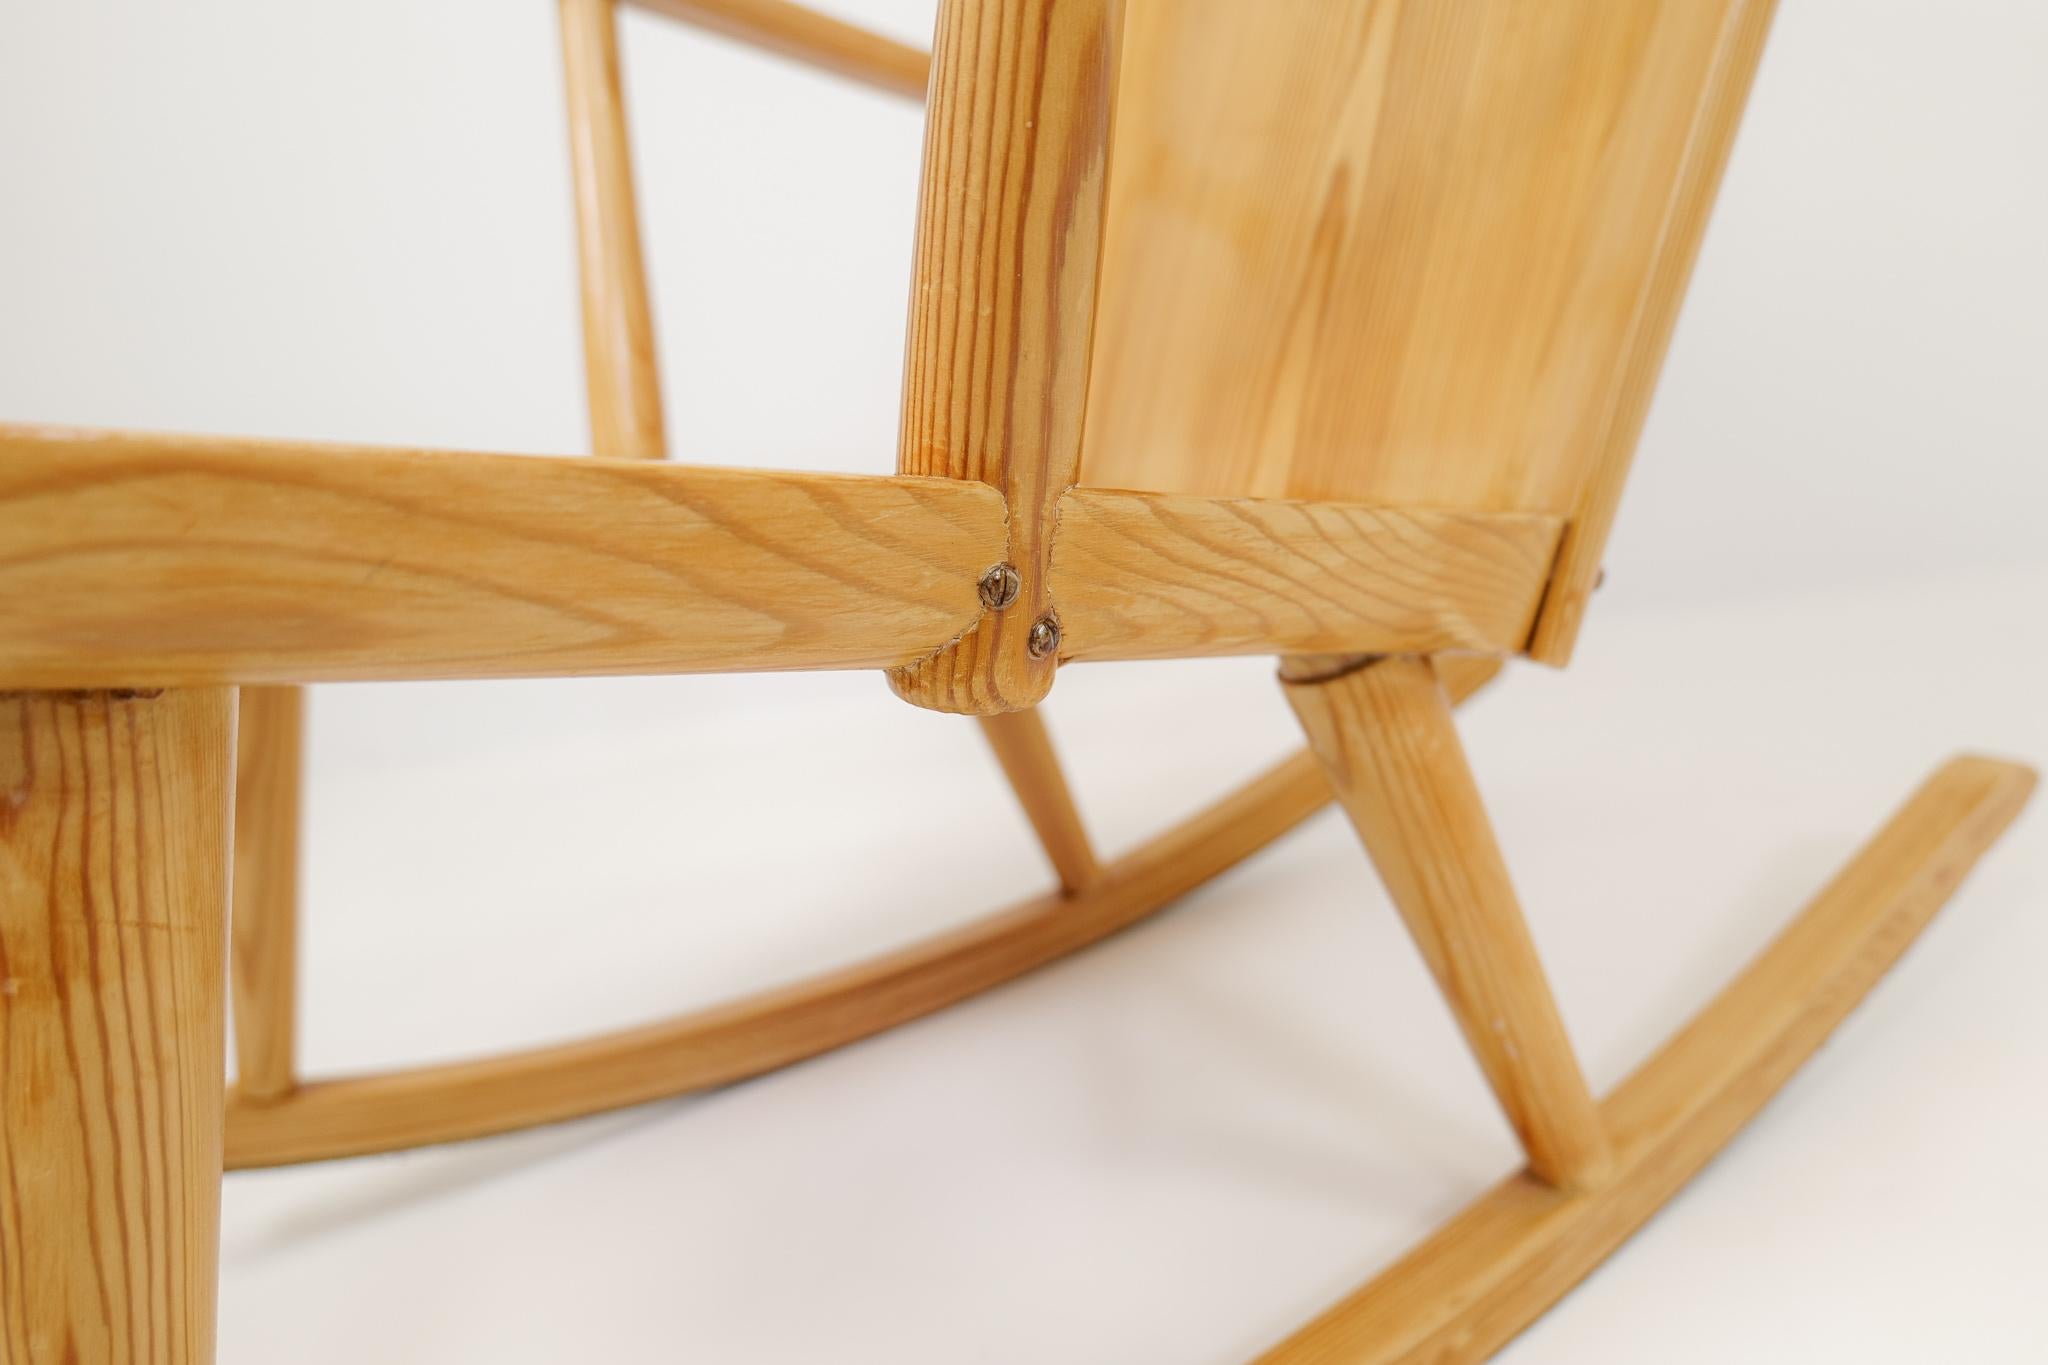 Mid-20th Century Midcentury Rocking Chair in Pine, Göran Malmvall, Sweden, 1940s For Sale